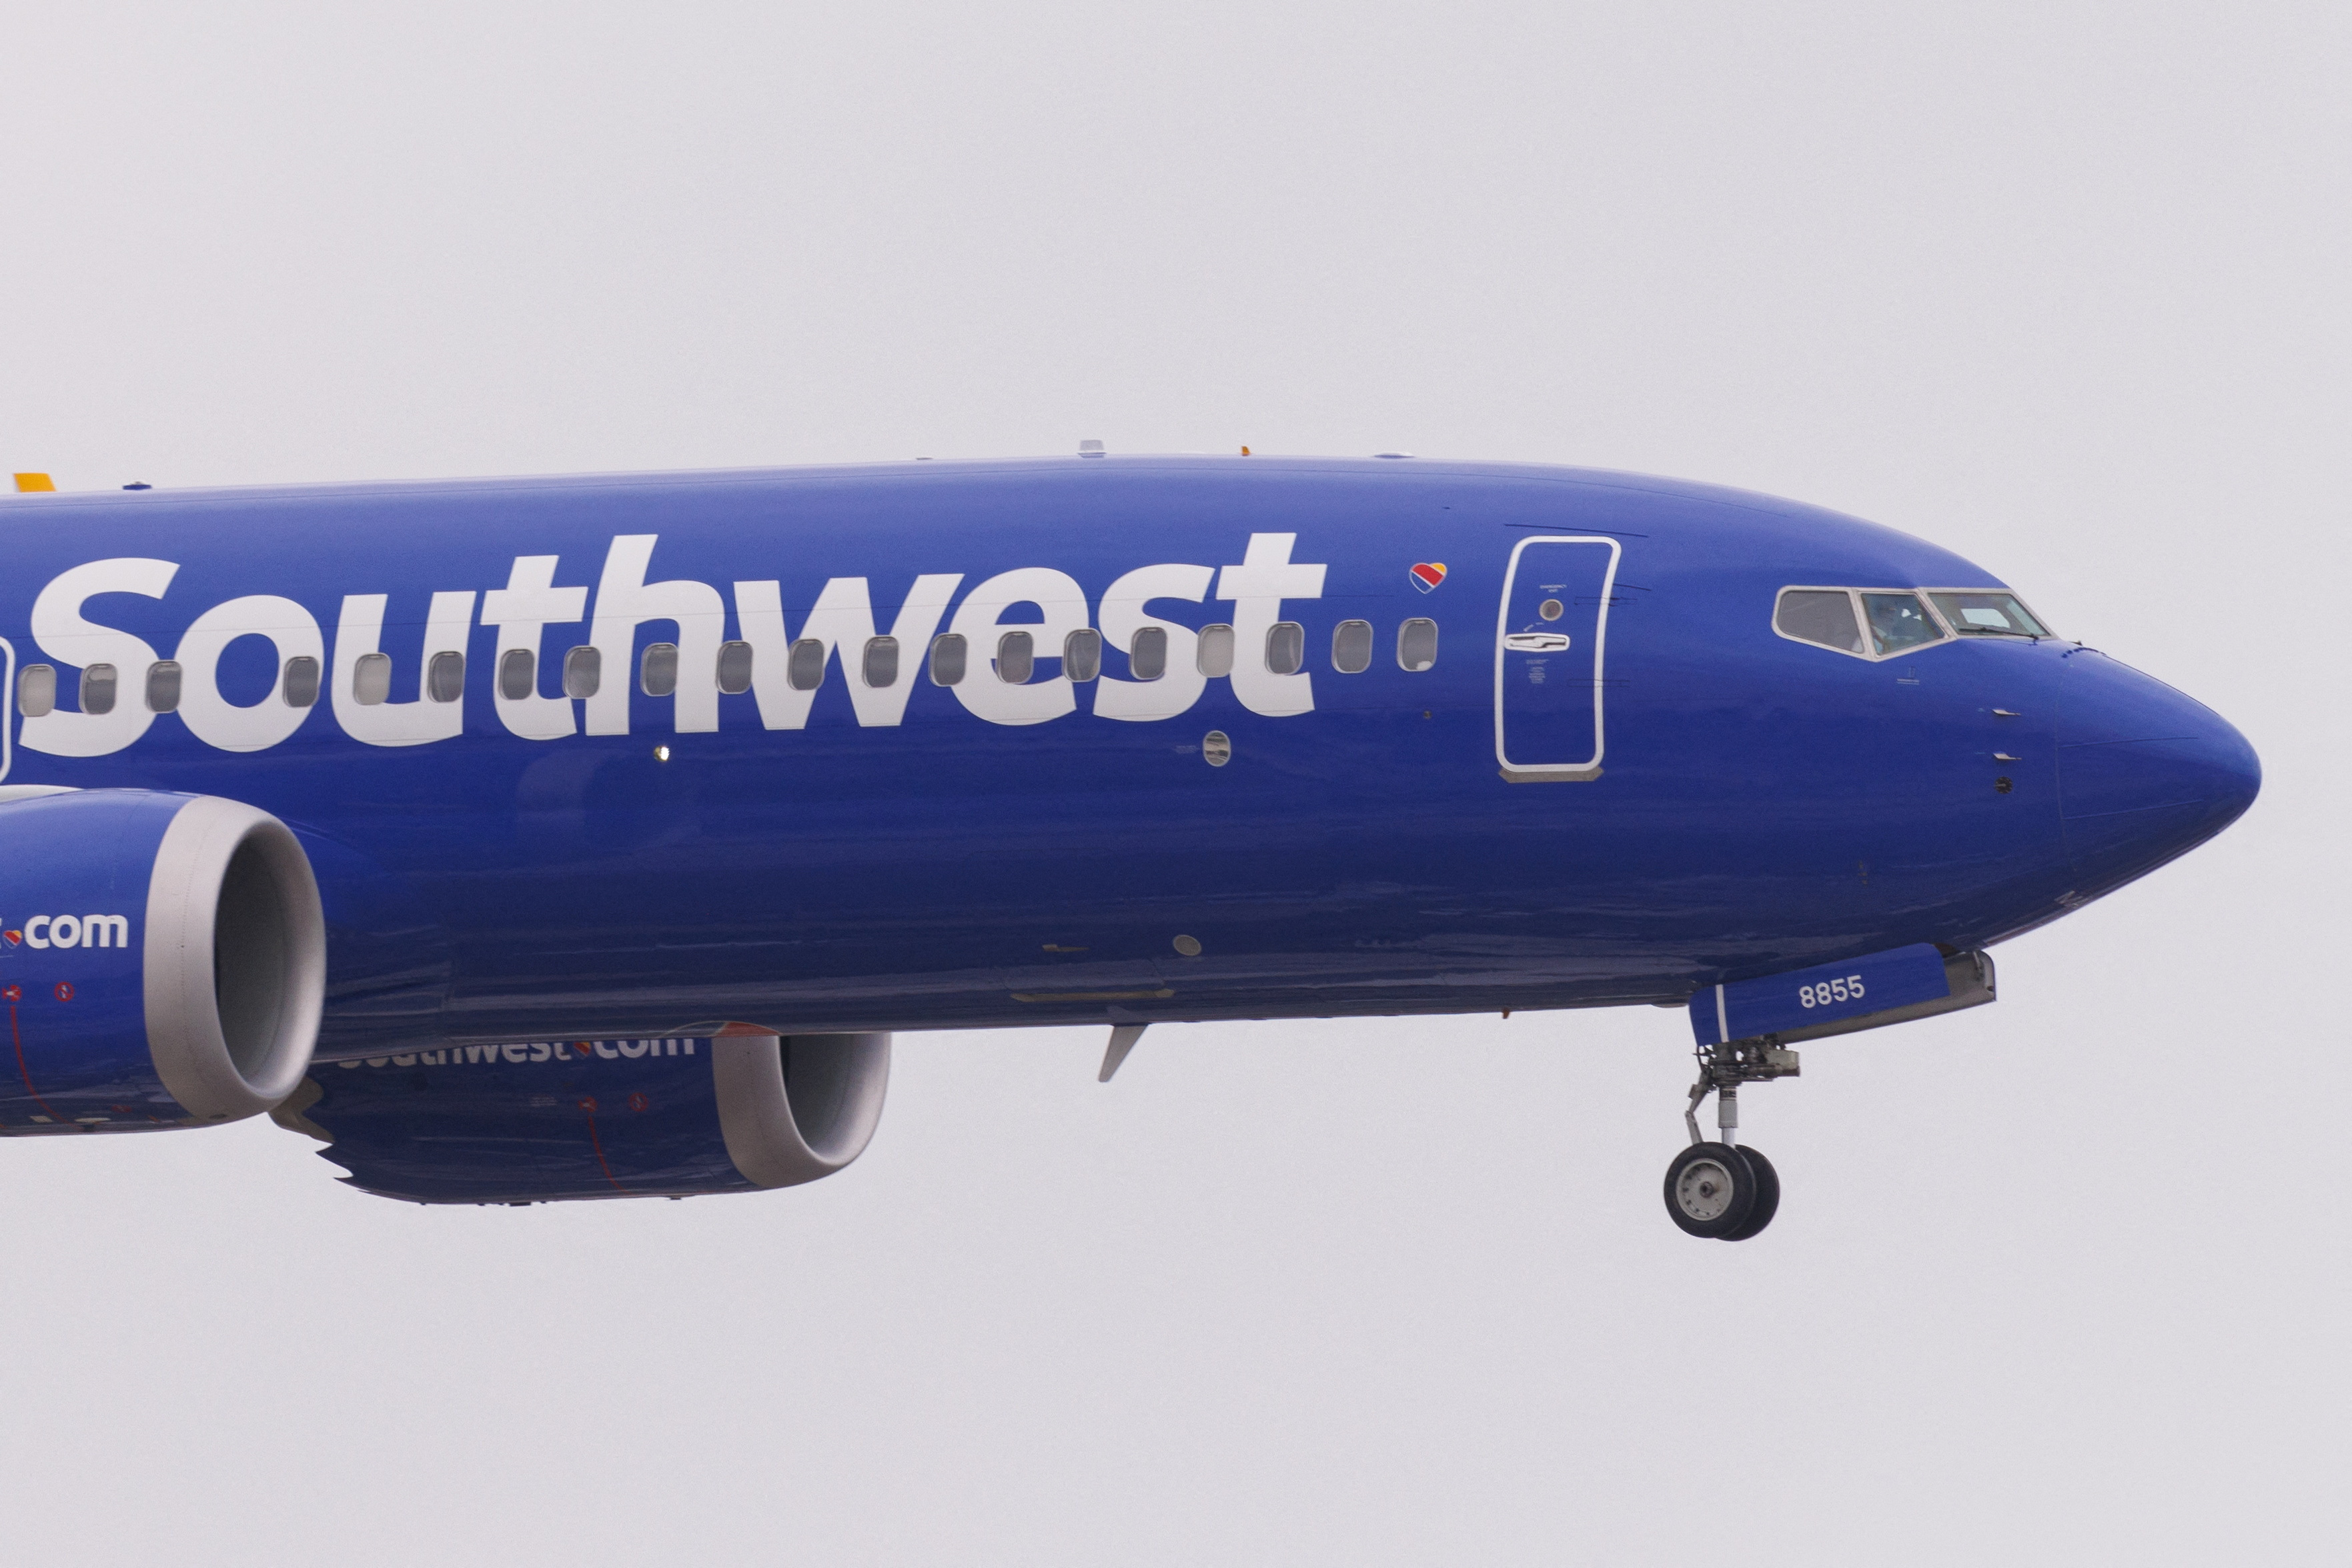 Southwest airline pilots approach to land at San Diego International airport